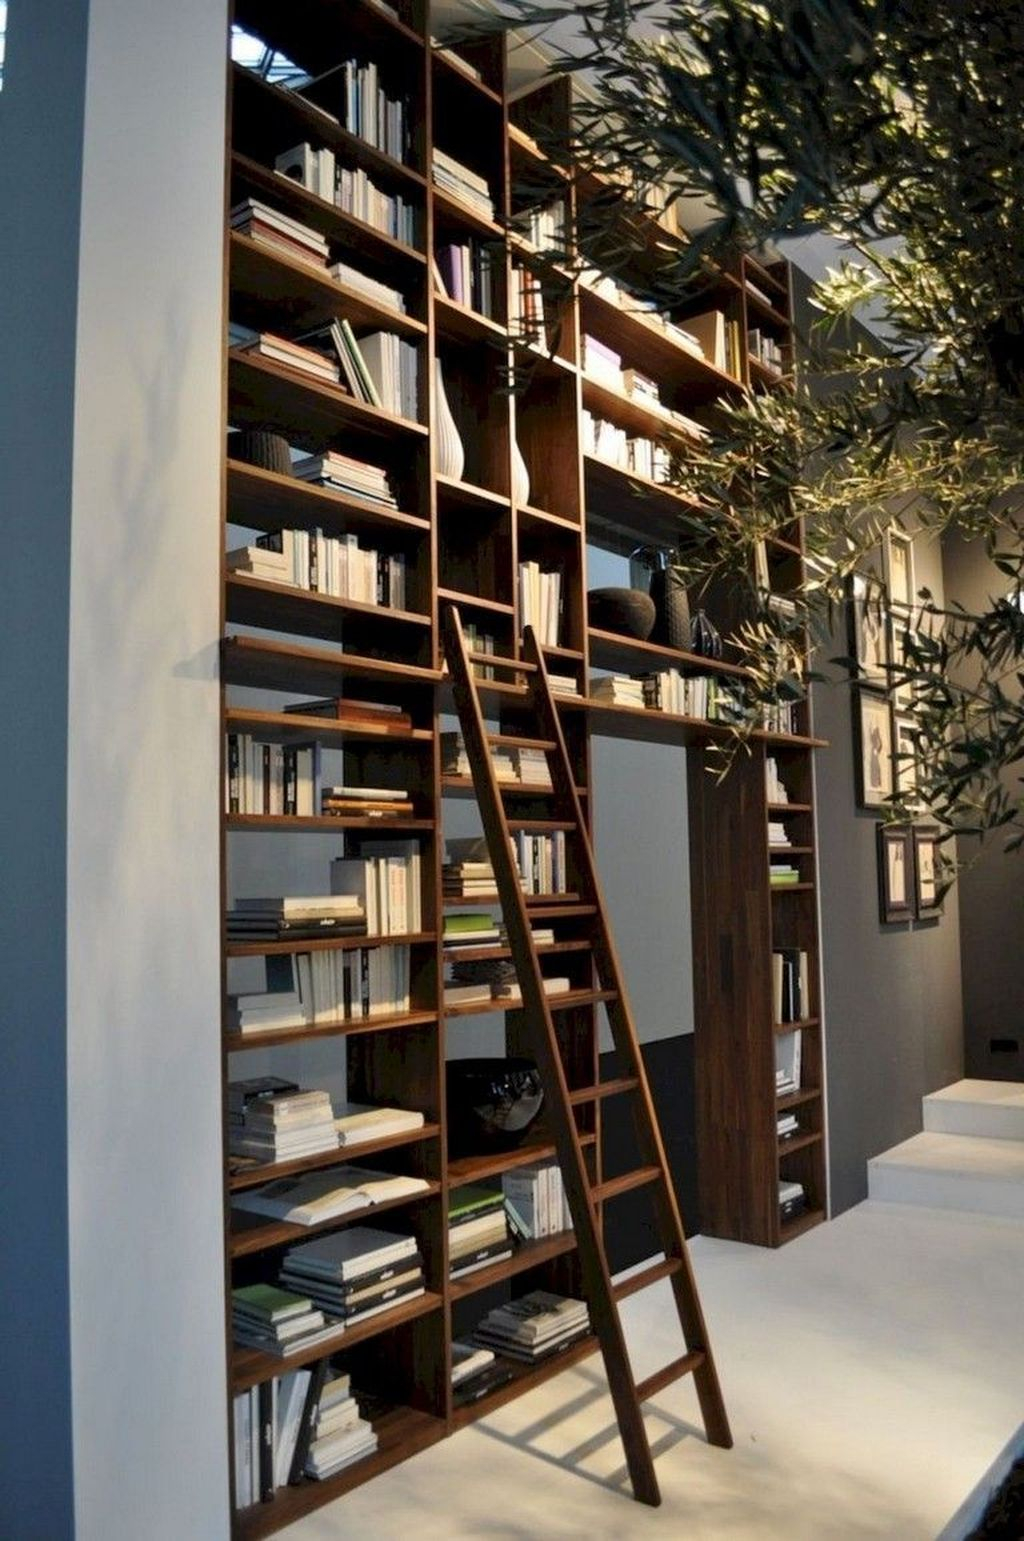 Smart Library Design Ideas For Home To Add To Your List 15